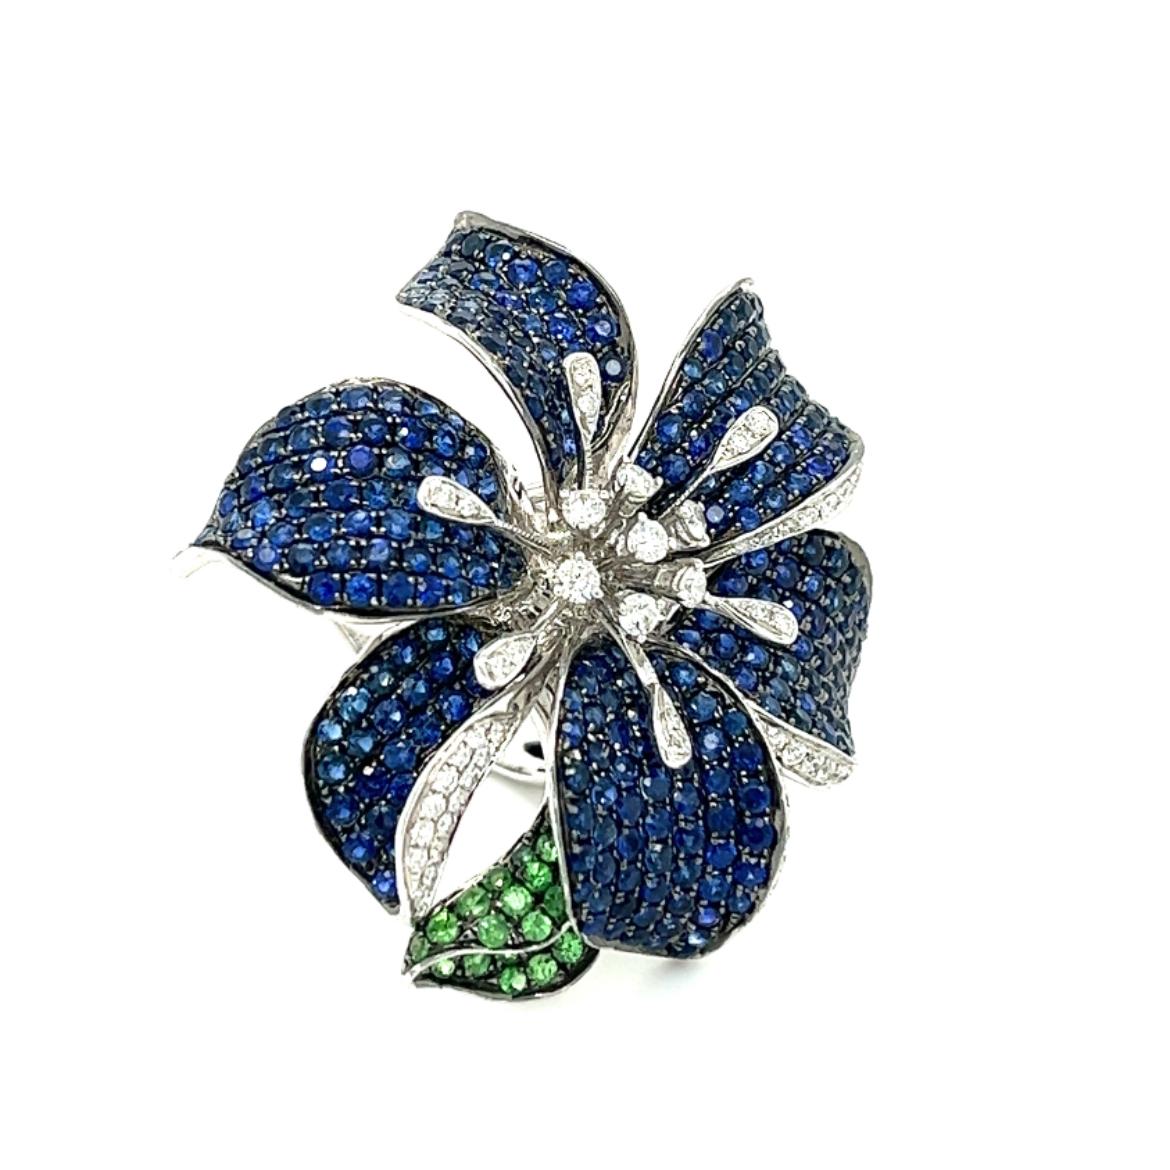 3 in 1 Blue Sapphire and Green Garnet Cocktail Ring, Brooch, Pendant Exquisite For Sale 5